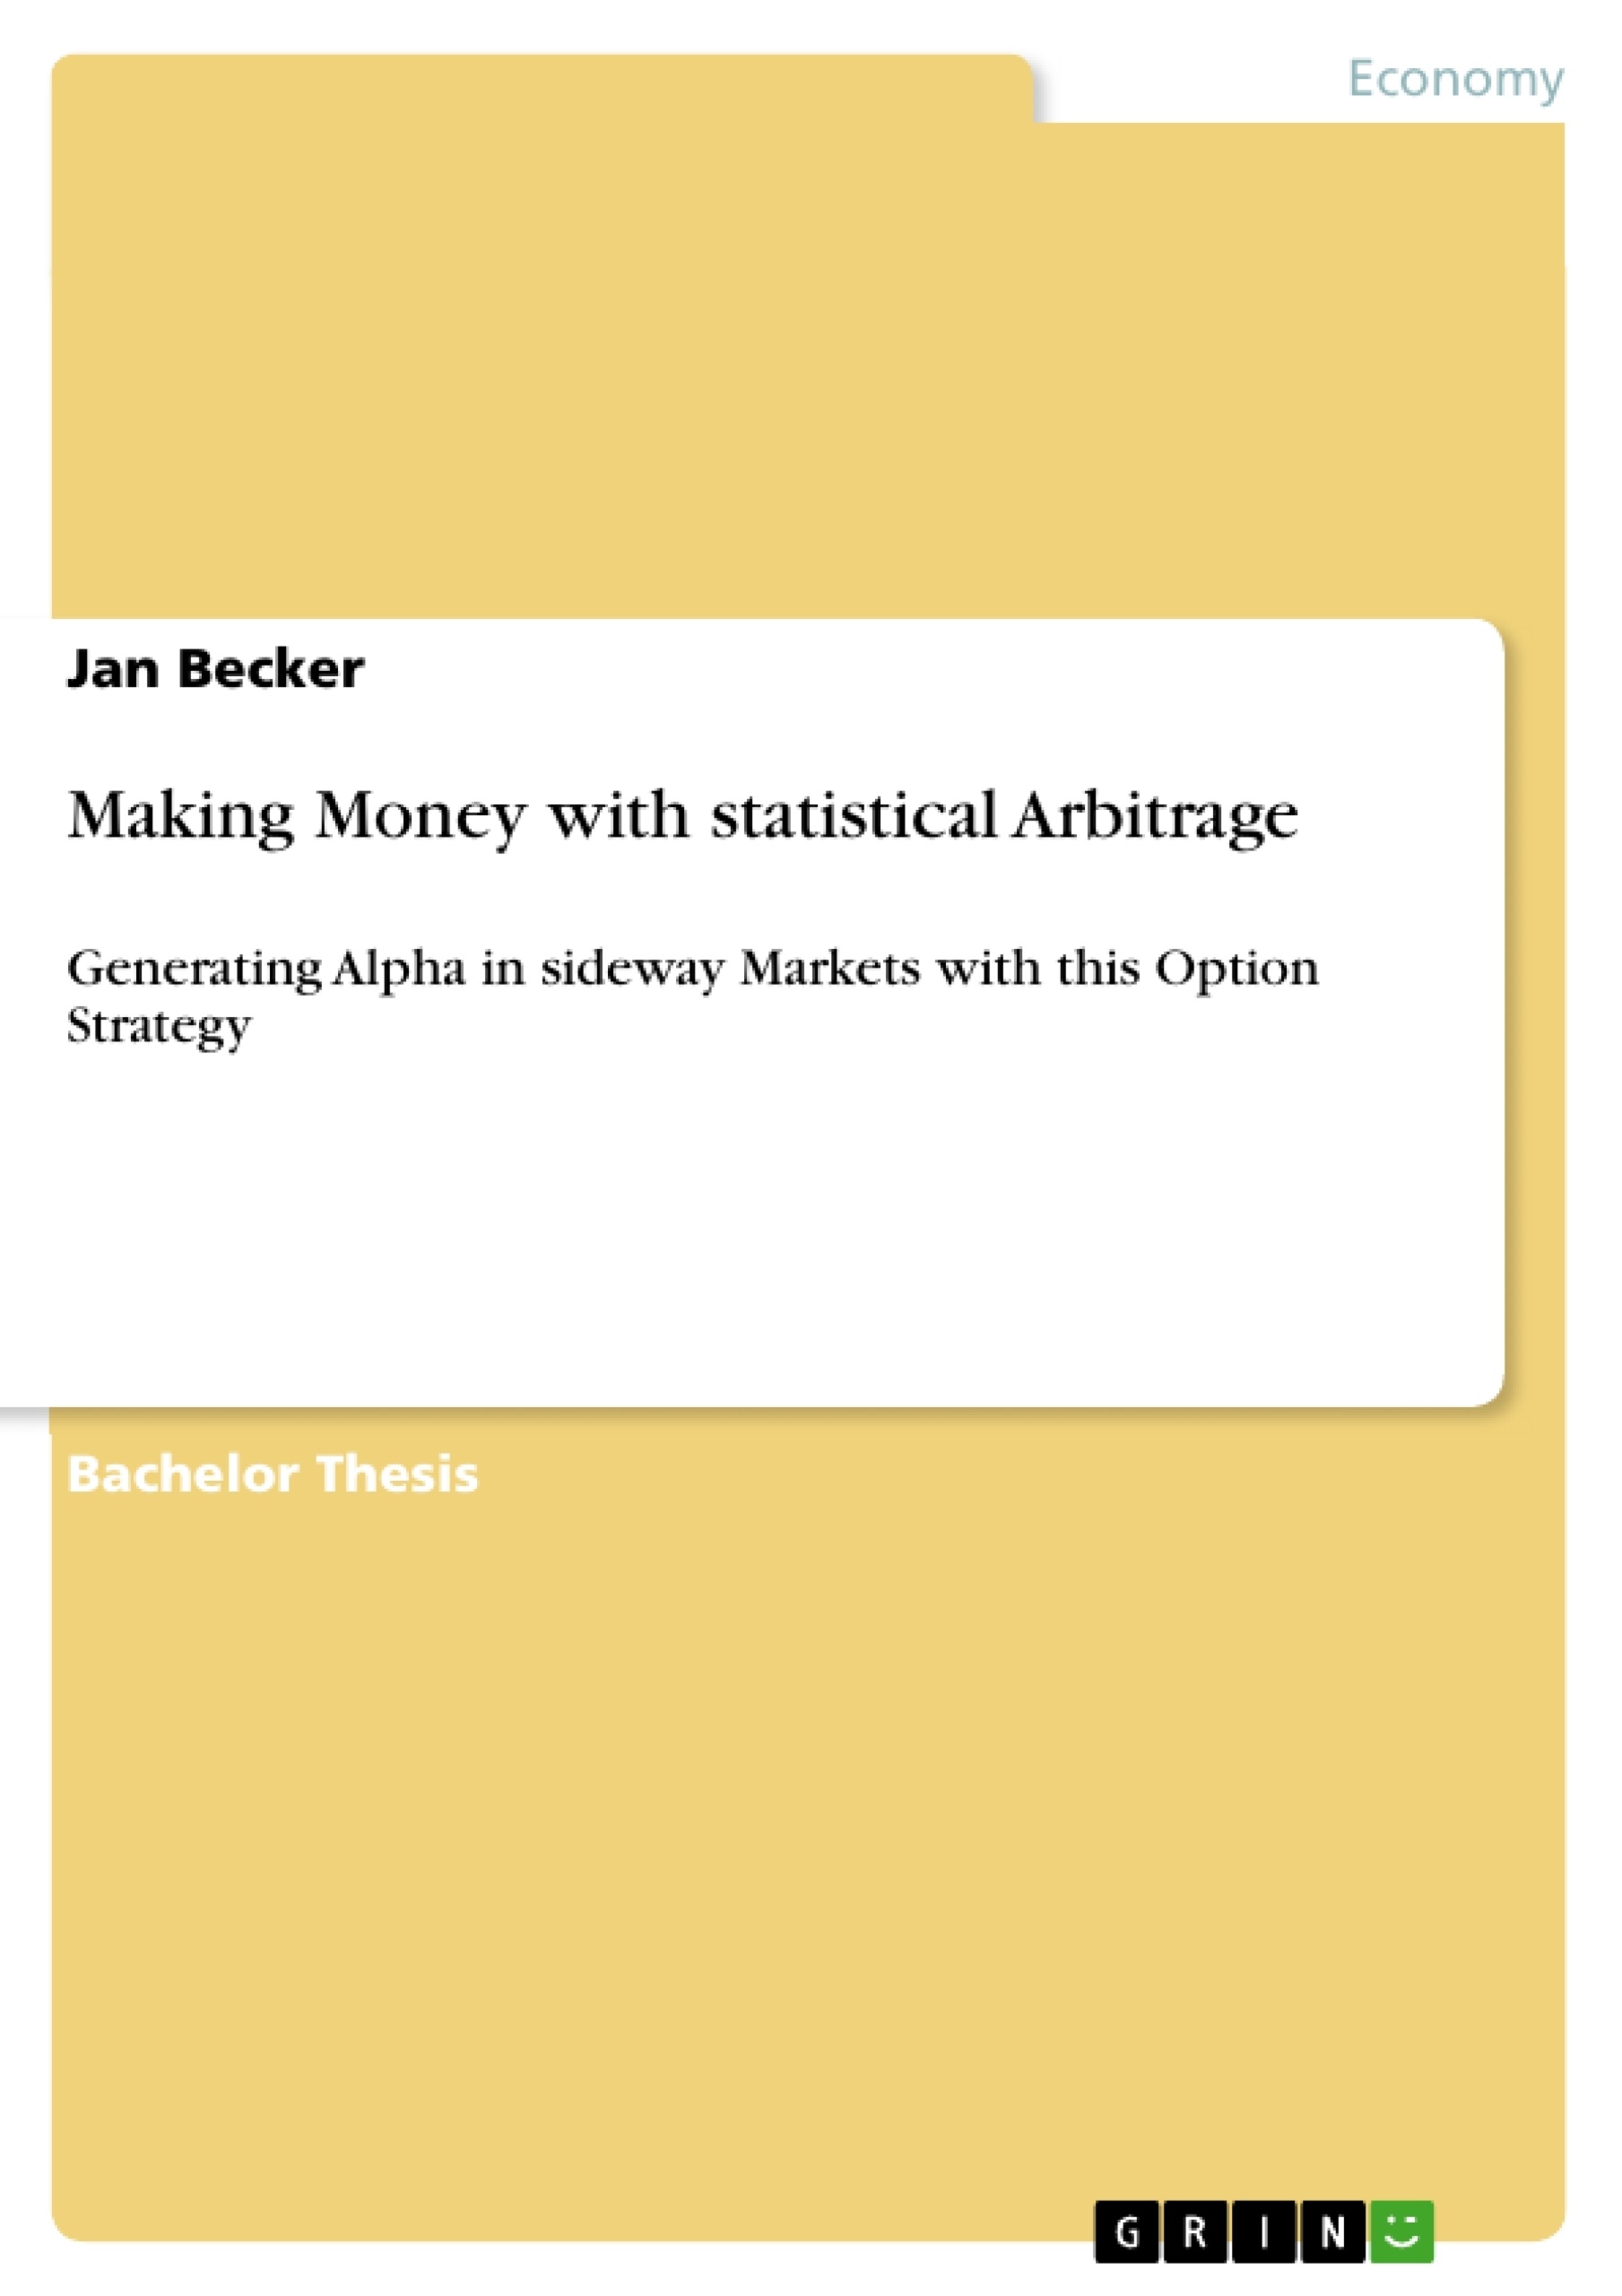 Title: Making Money with statistical Arbitrage